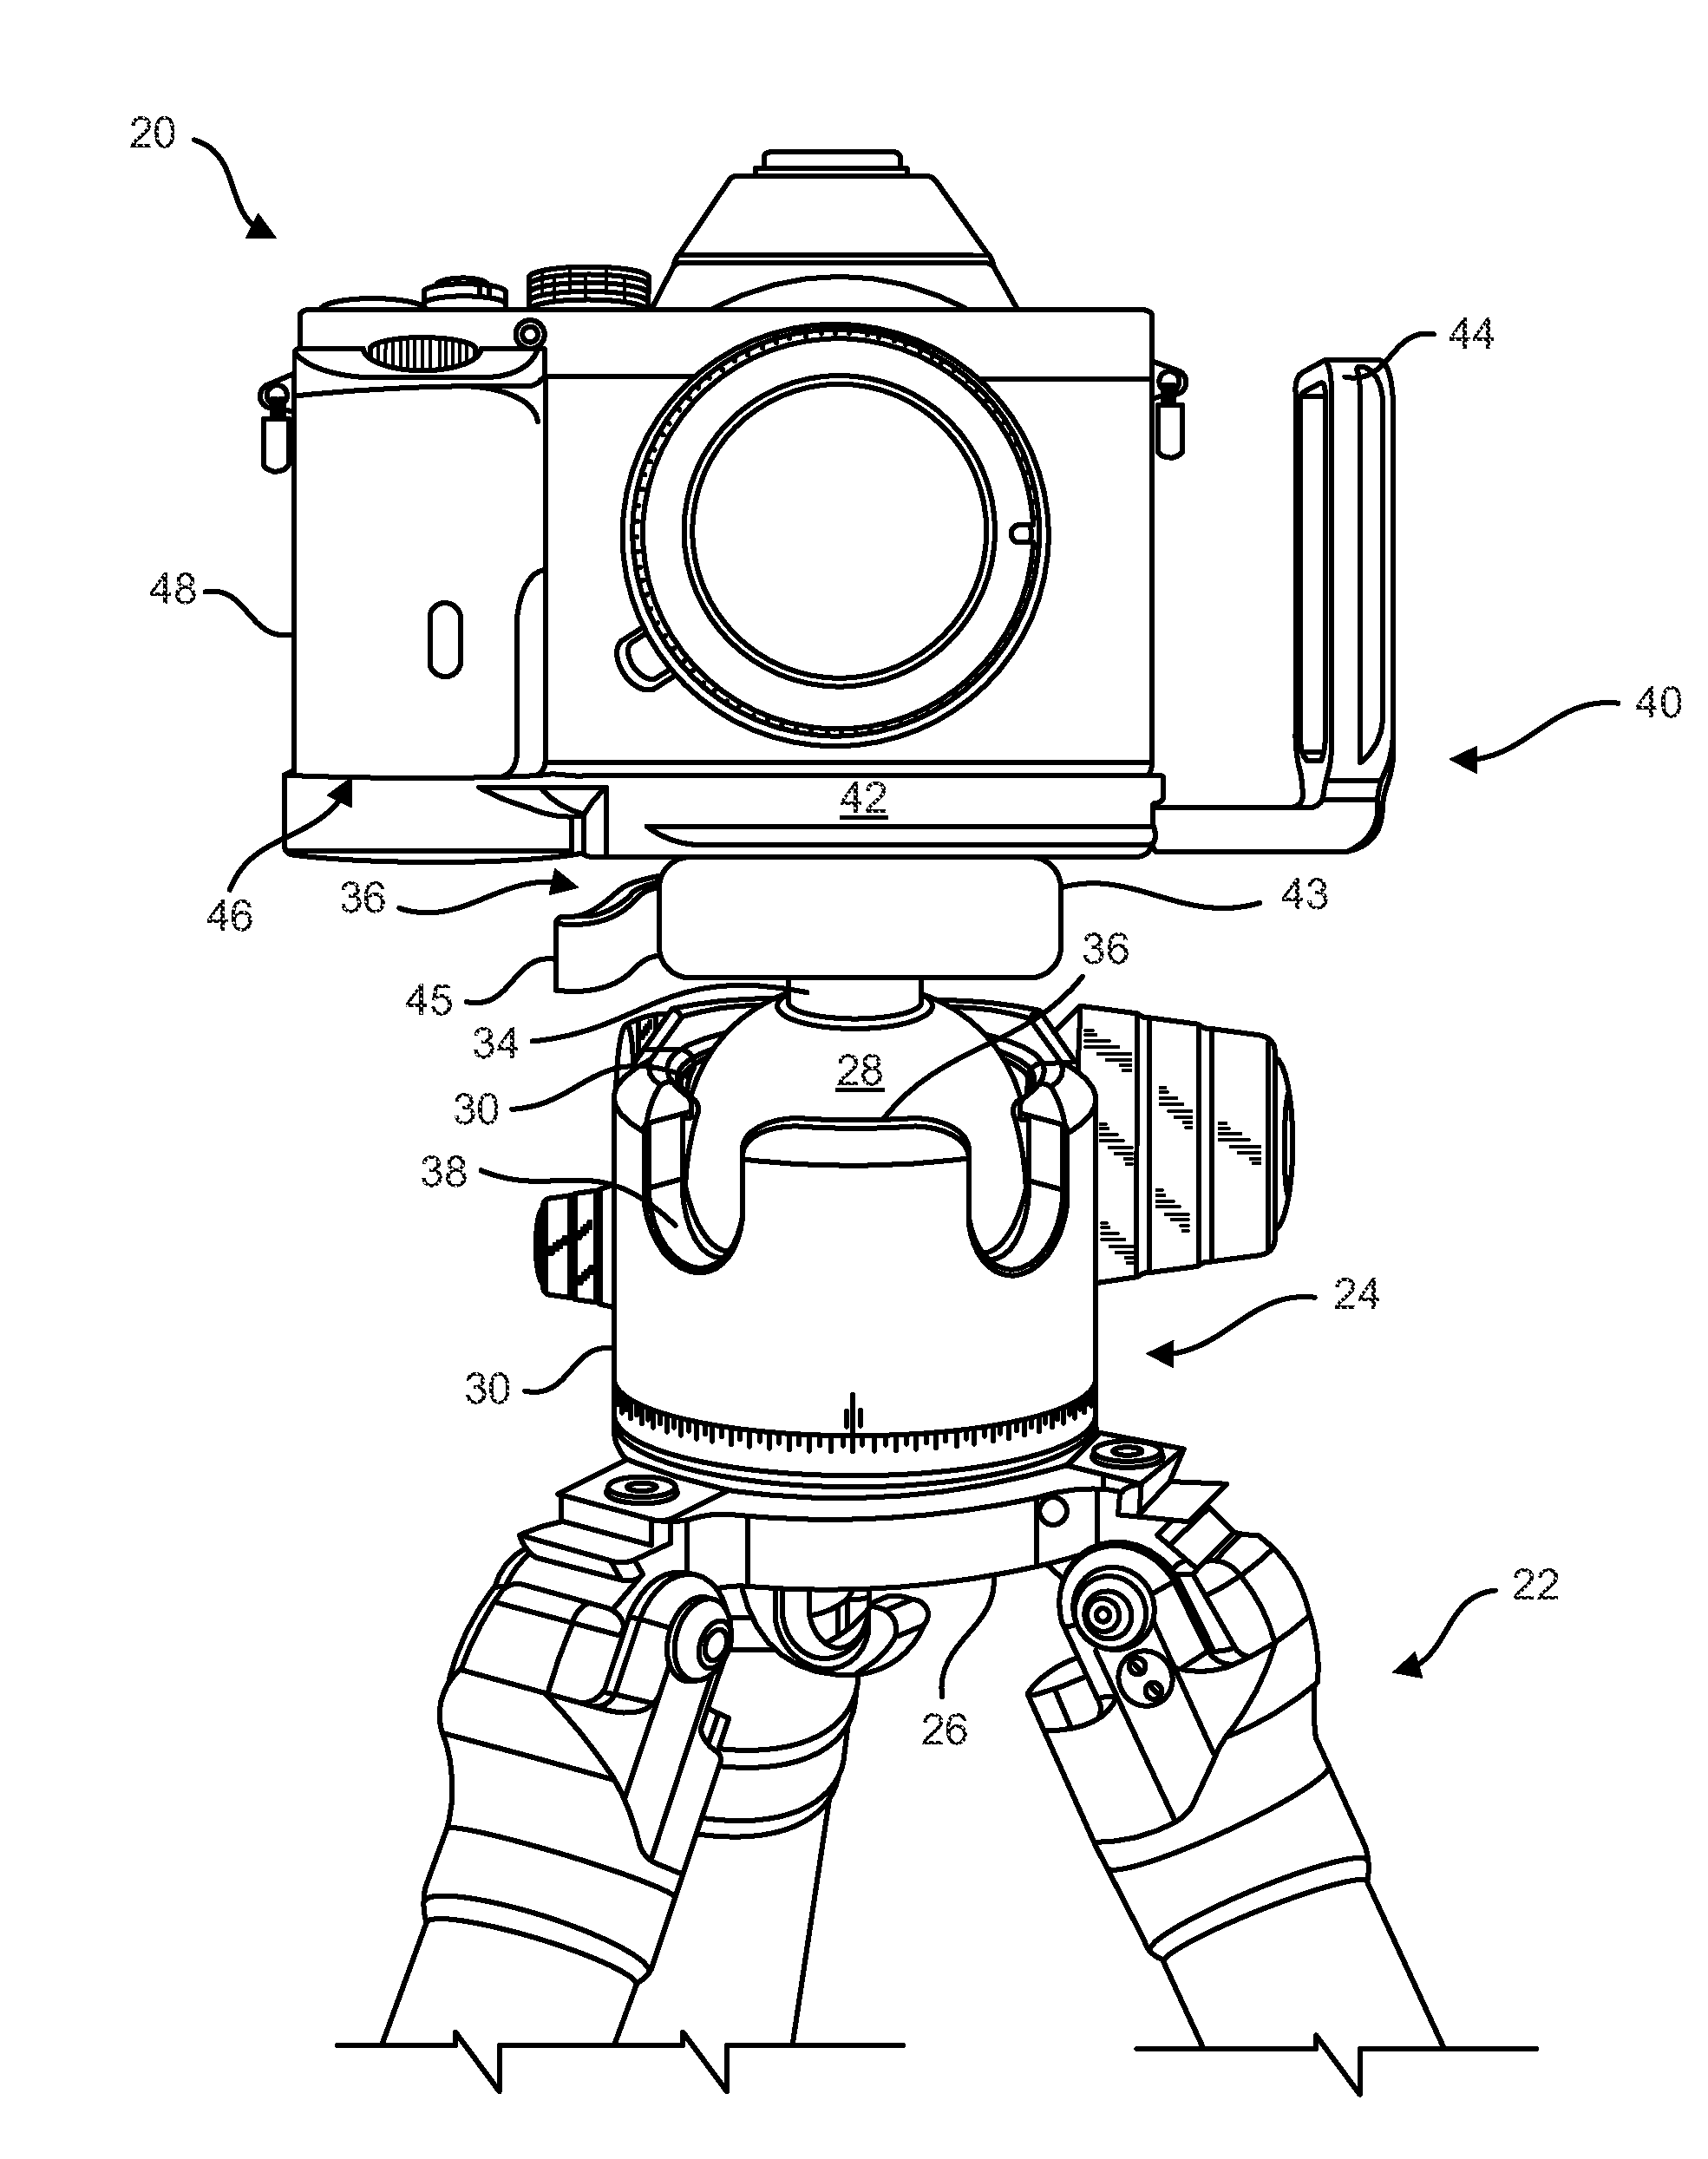 Plate for camera equipment